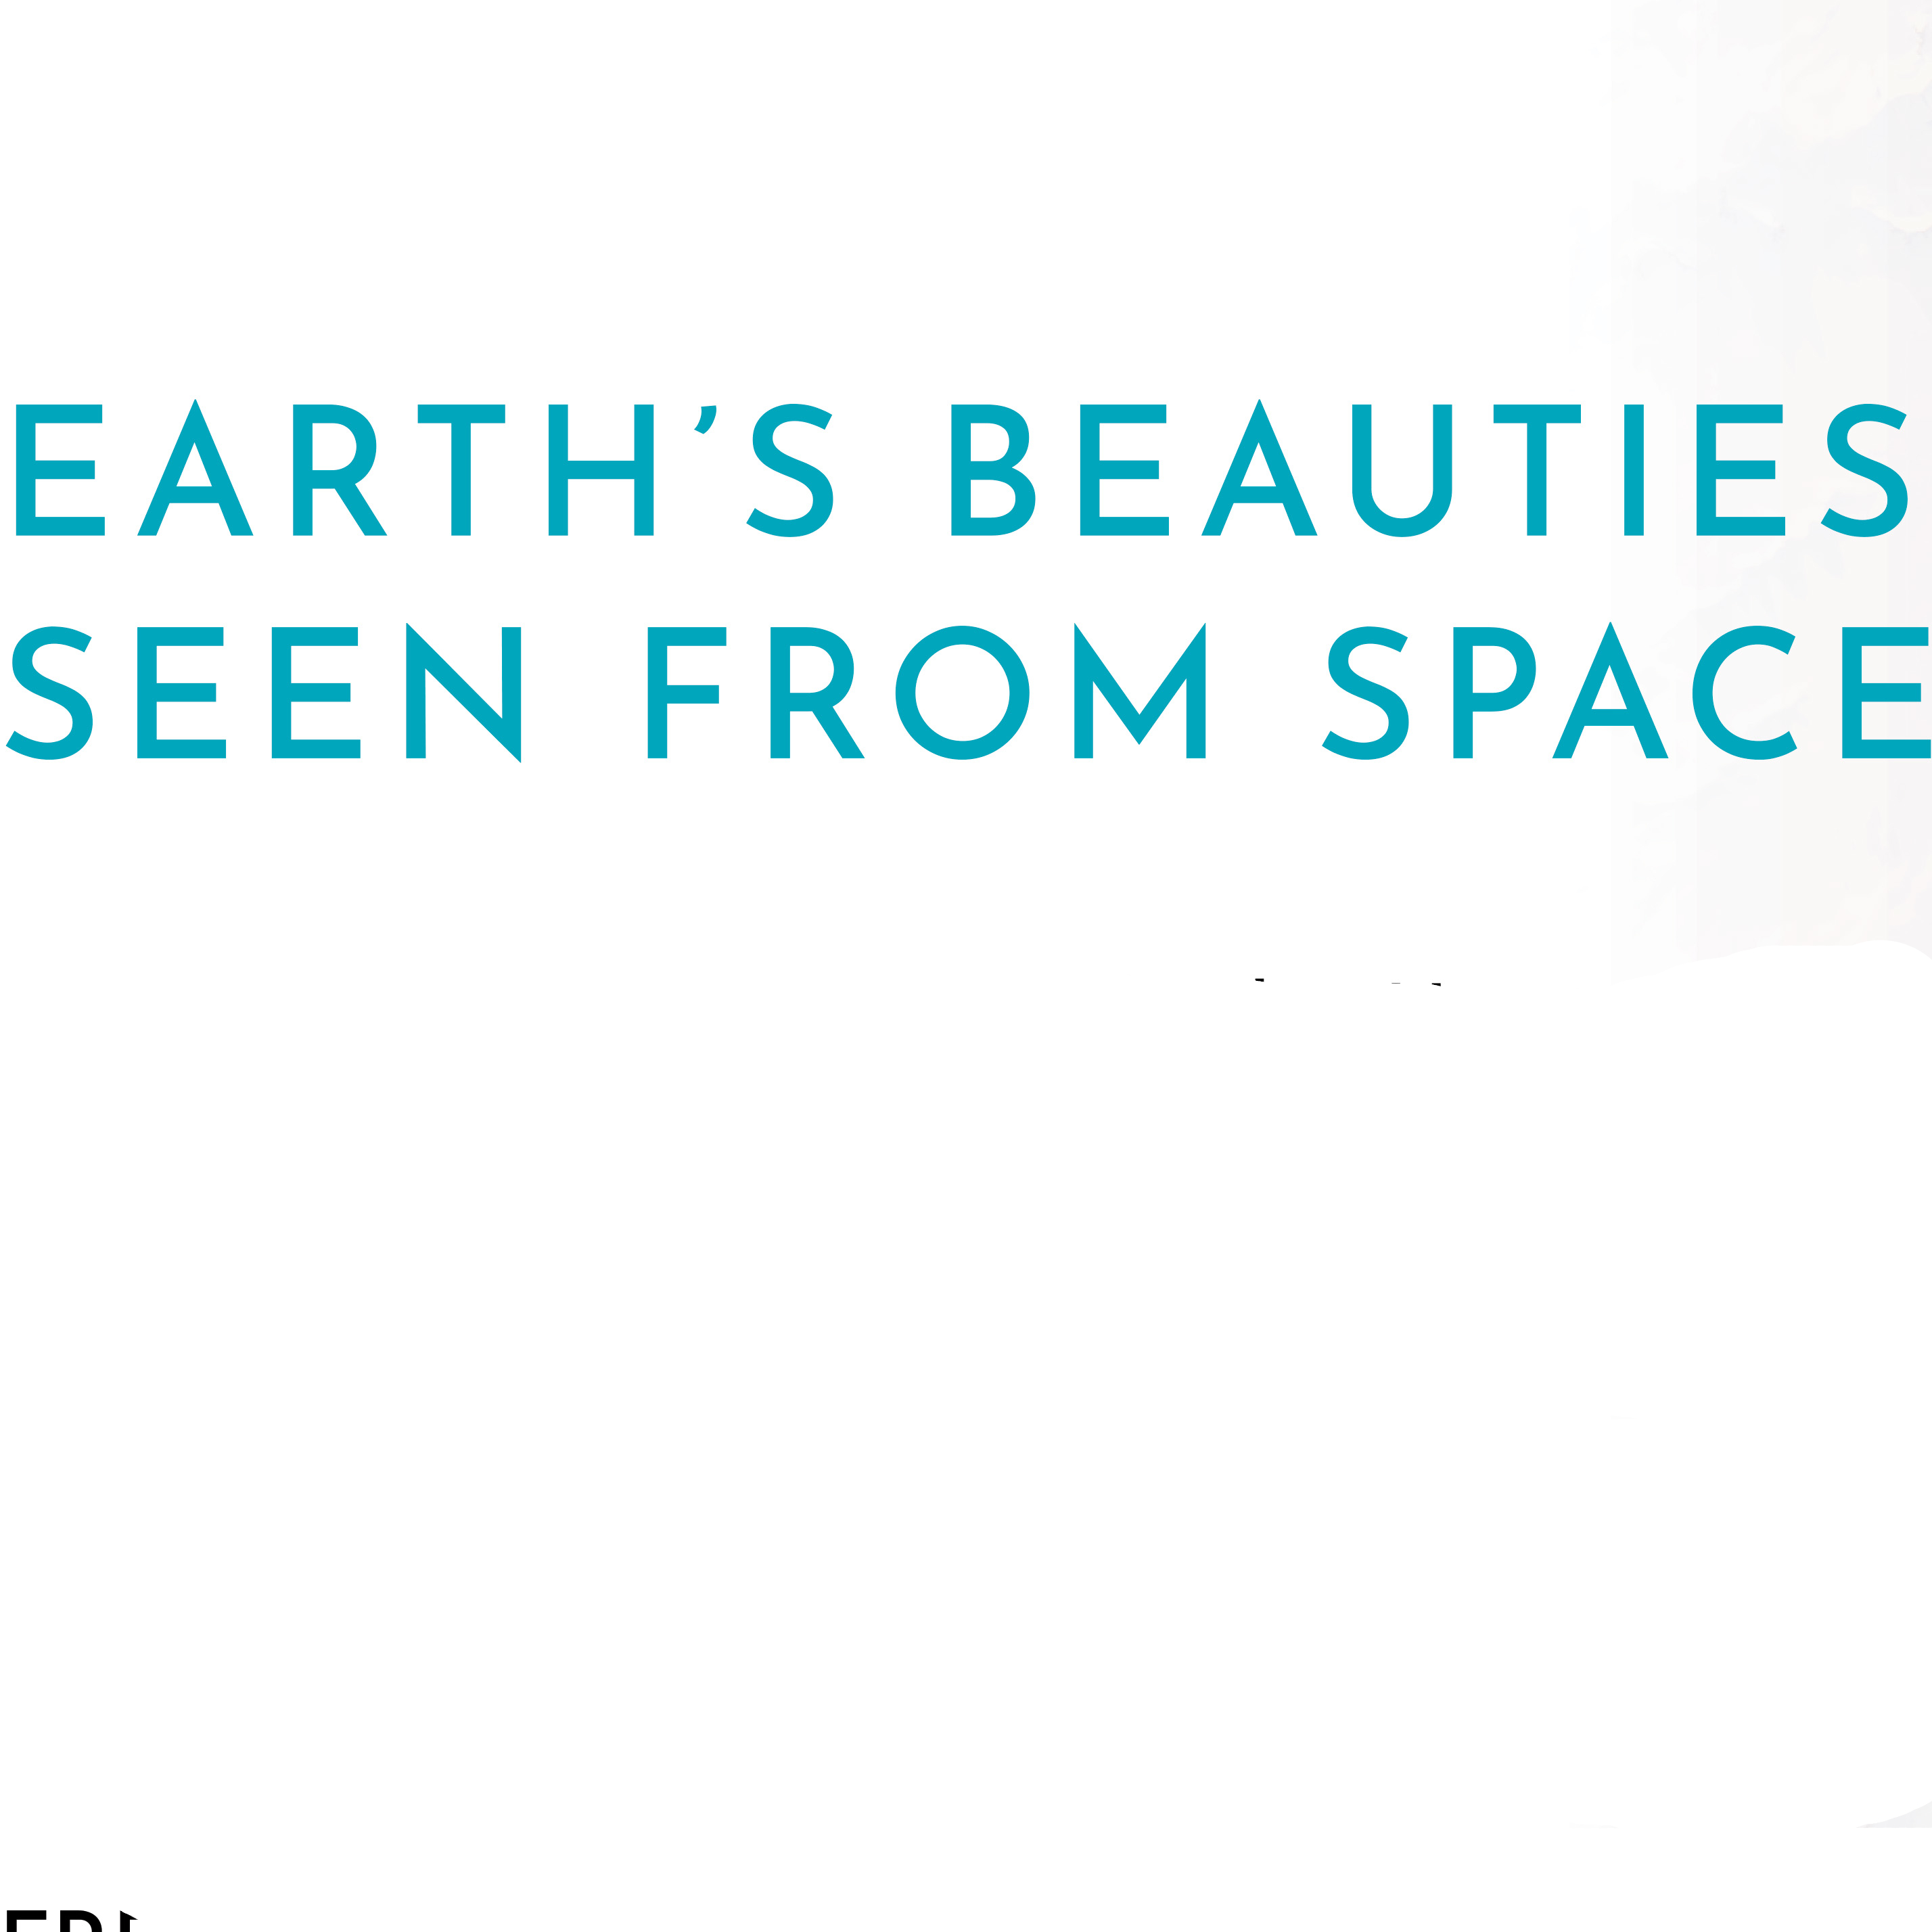 Earth's beauties seen from space - exibition invitation